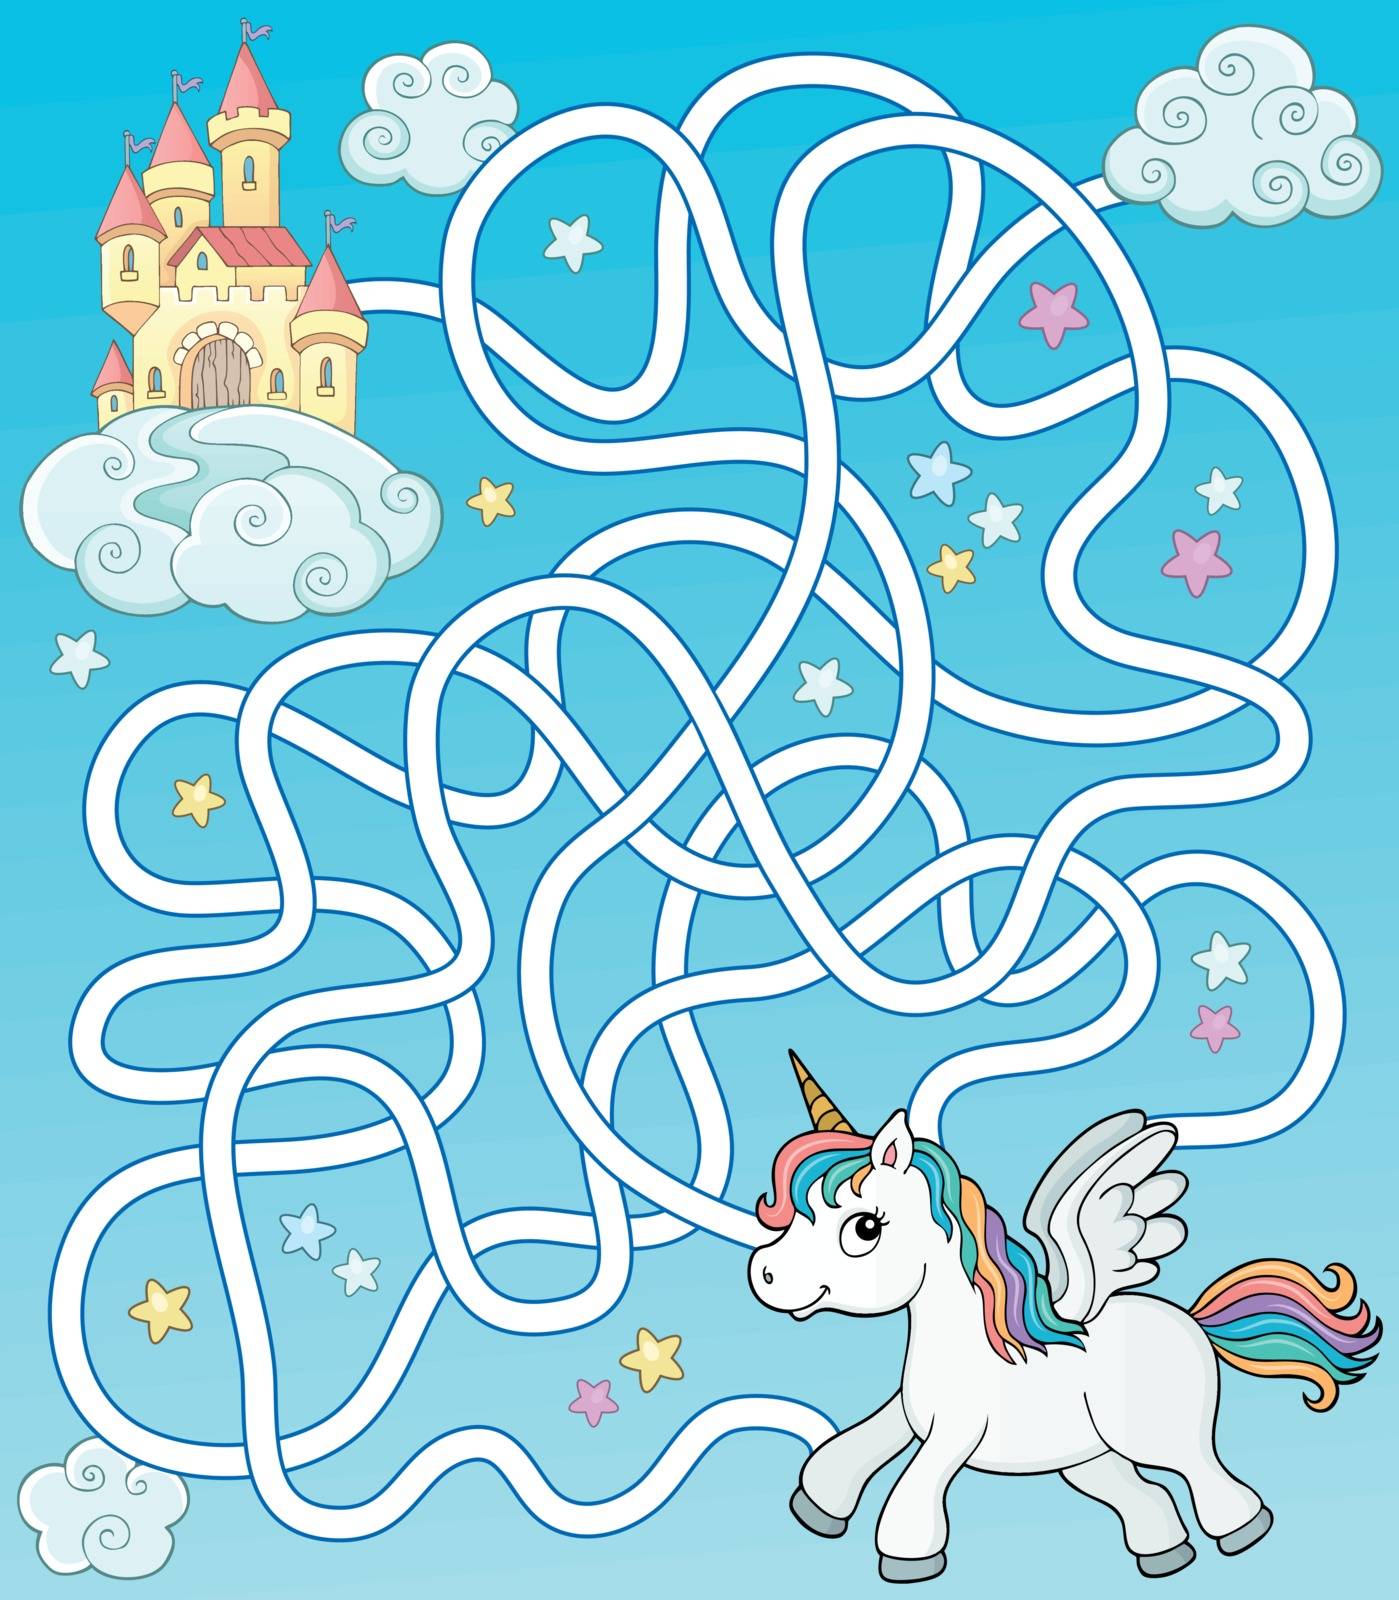 Maze 35 with flying unicorn and castle by clairev